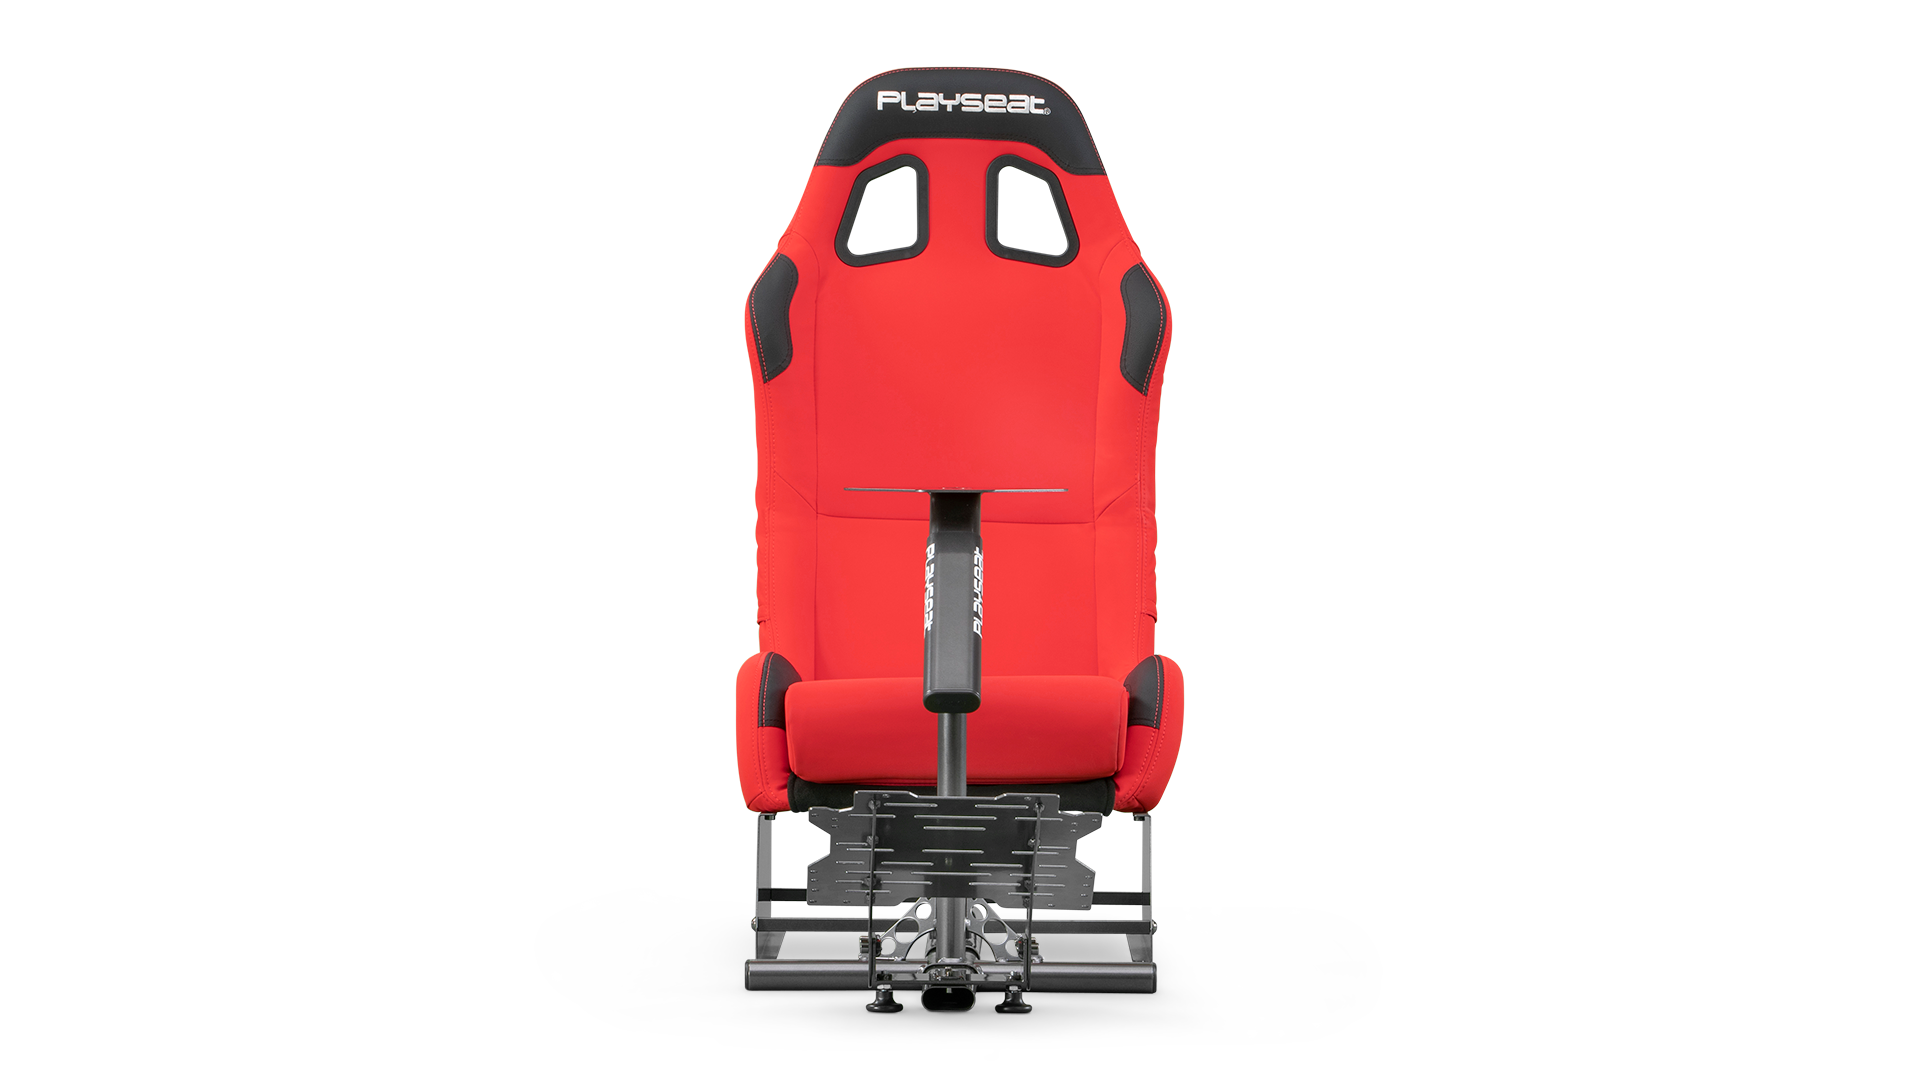 playseat-evolution-red-racing-simulator-front-view-1920x1080-1.png